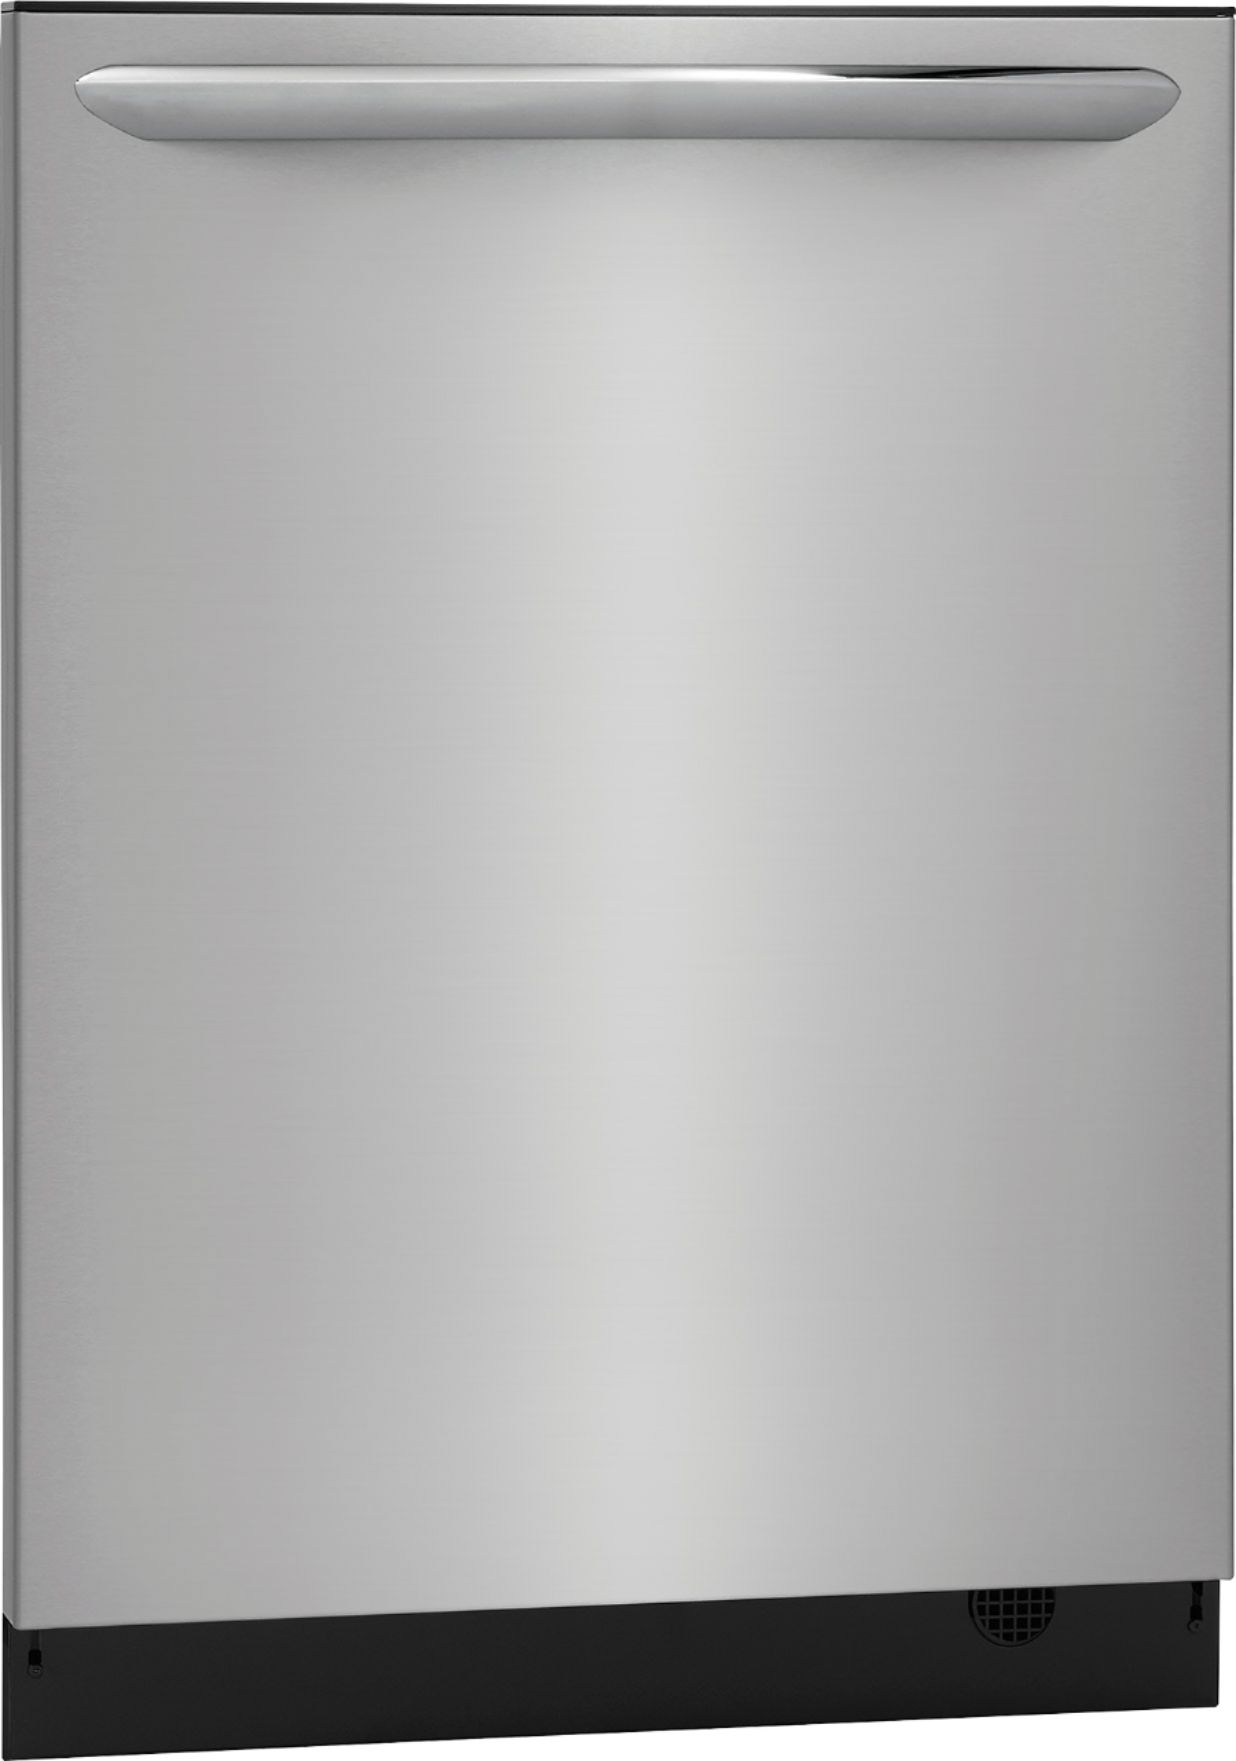 Angle View: Frigidaire - Gallery 24" Top Control Tall Tub Built-In Dishwasher with Stainless Steel Tub - Stainless steel